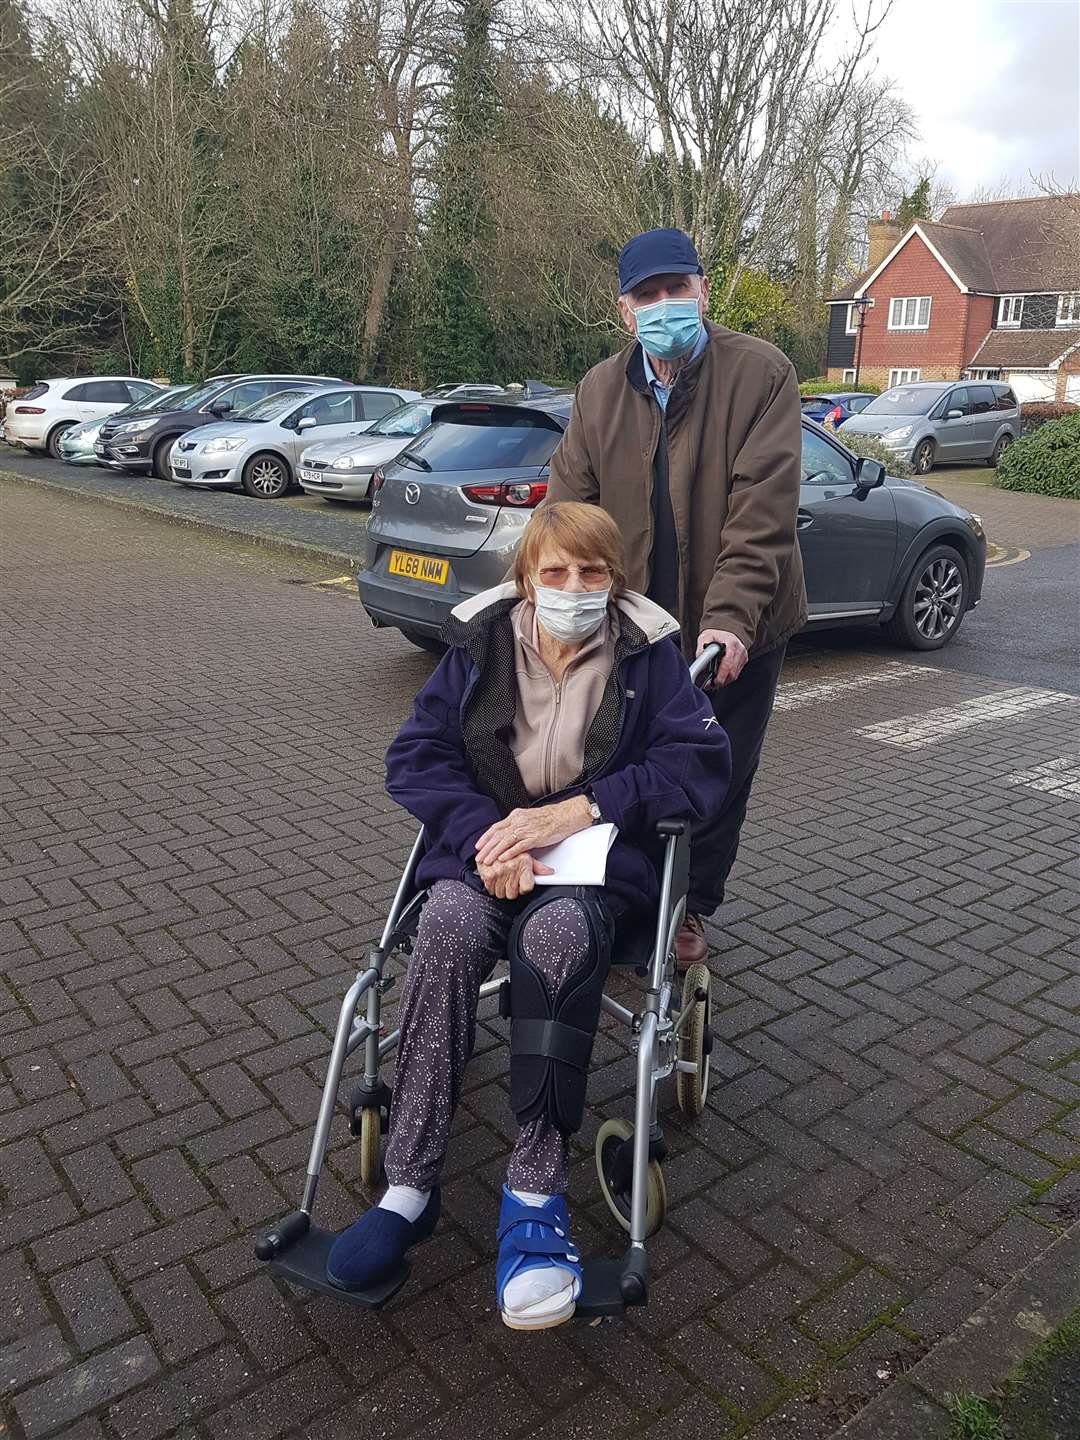 Ken and Gwen Whibley at the Glebe Medical Centre in Harrietsham today